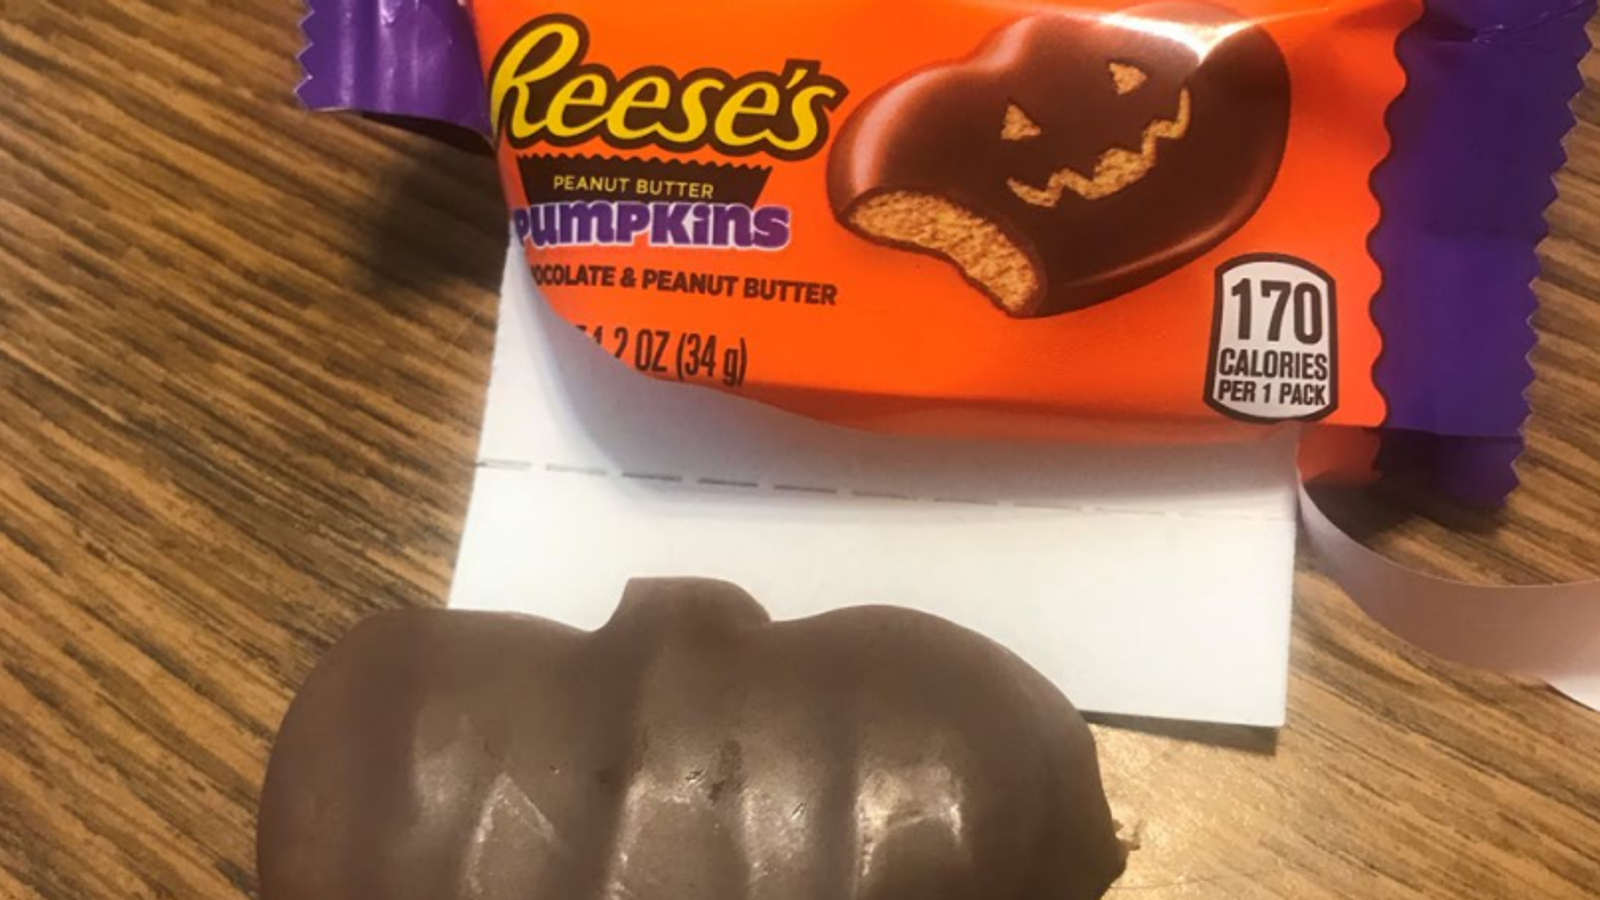 Florida woman wants Hershey to pay m over 'misleading' Halloween sweets